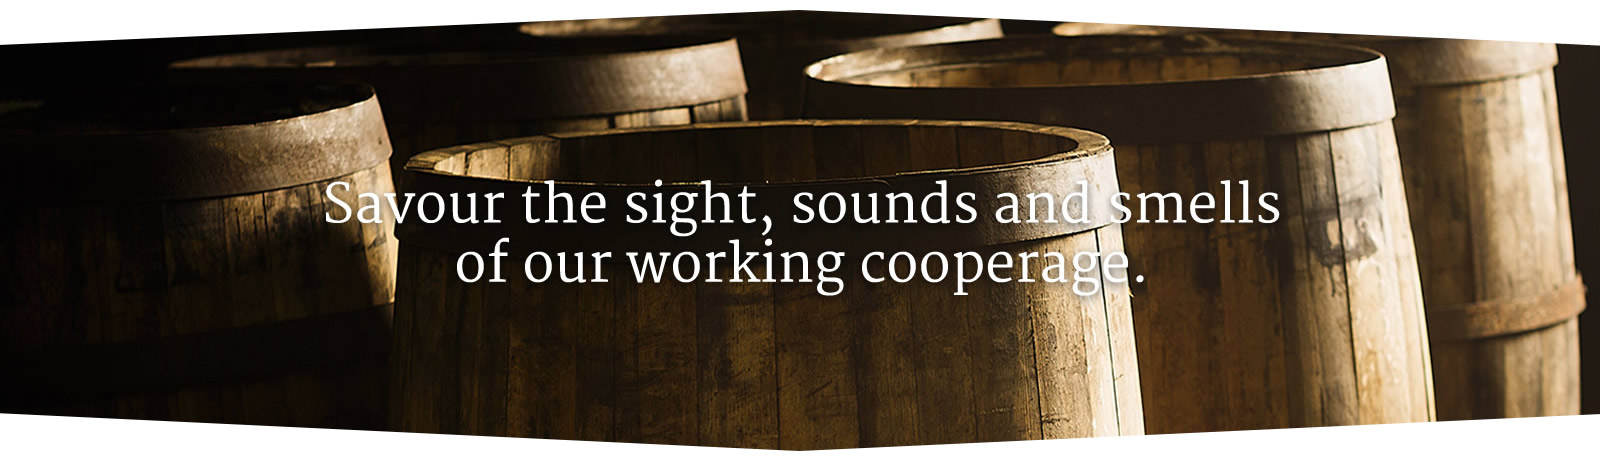 Savour the sights, sounds and smells of our working cooperage.